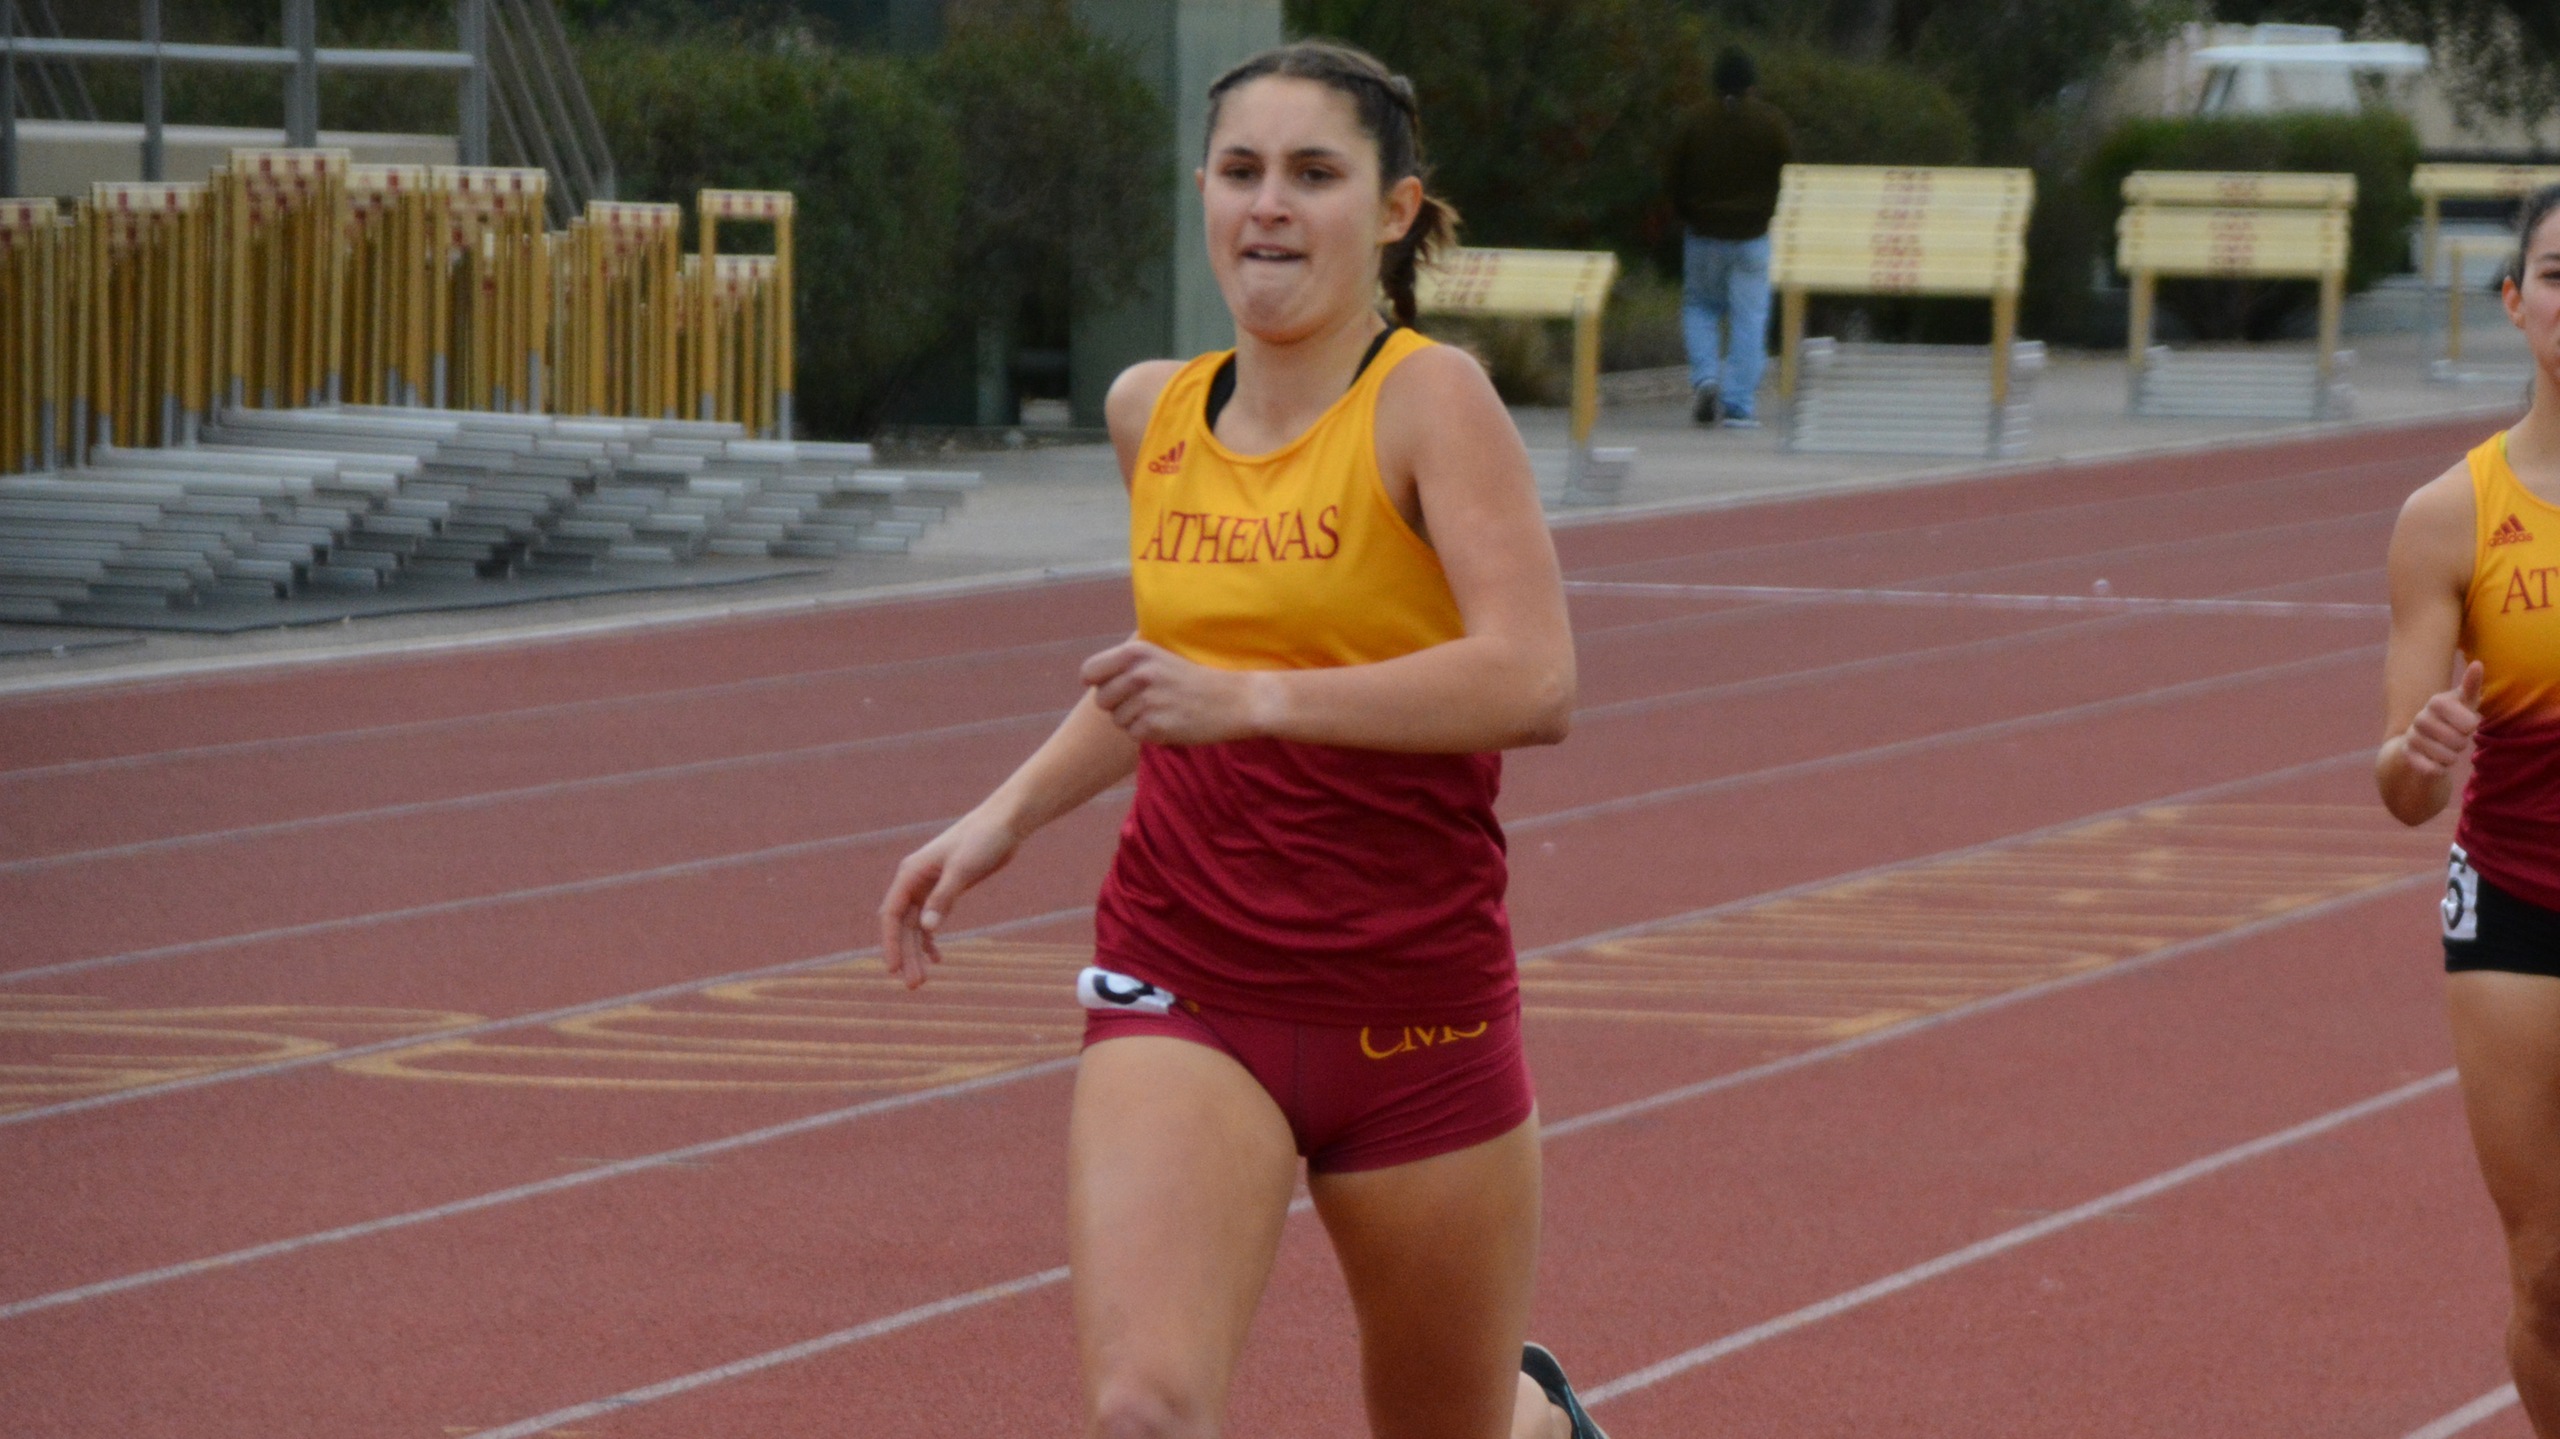 Laura Zimmer currently qualifies for NCAAs by a margin of .02